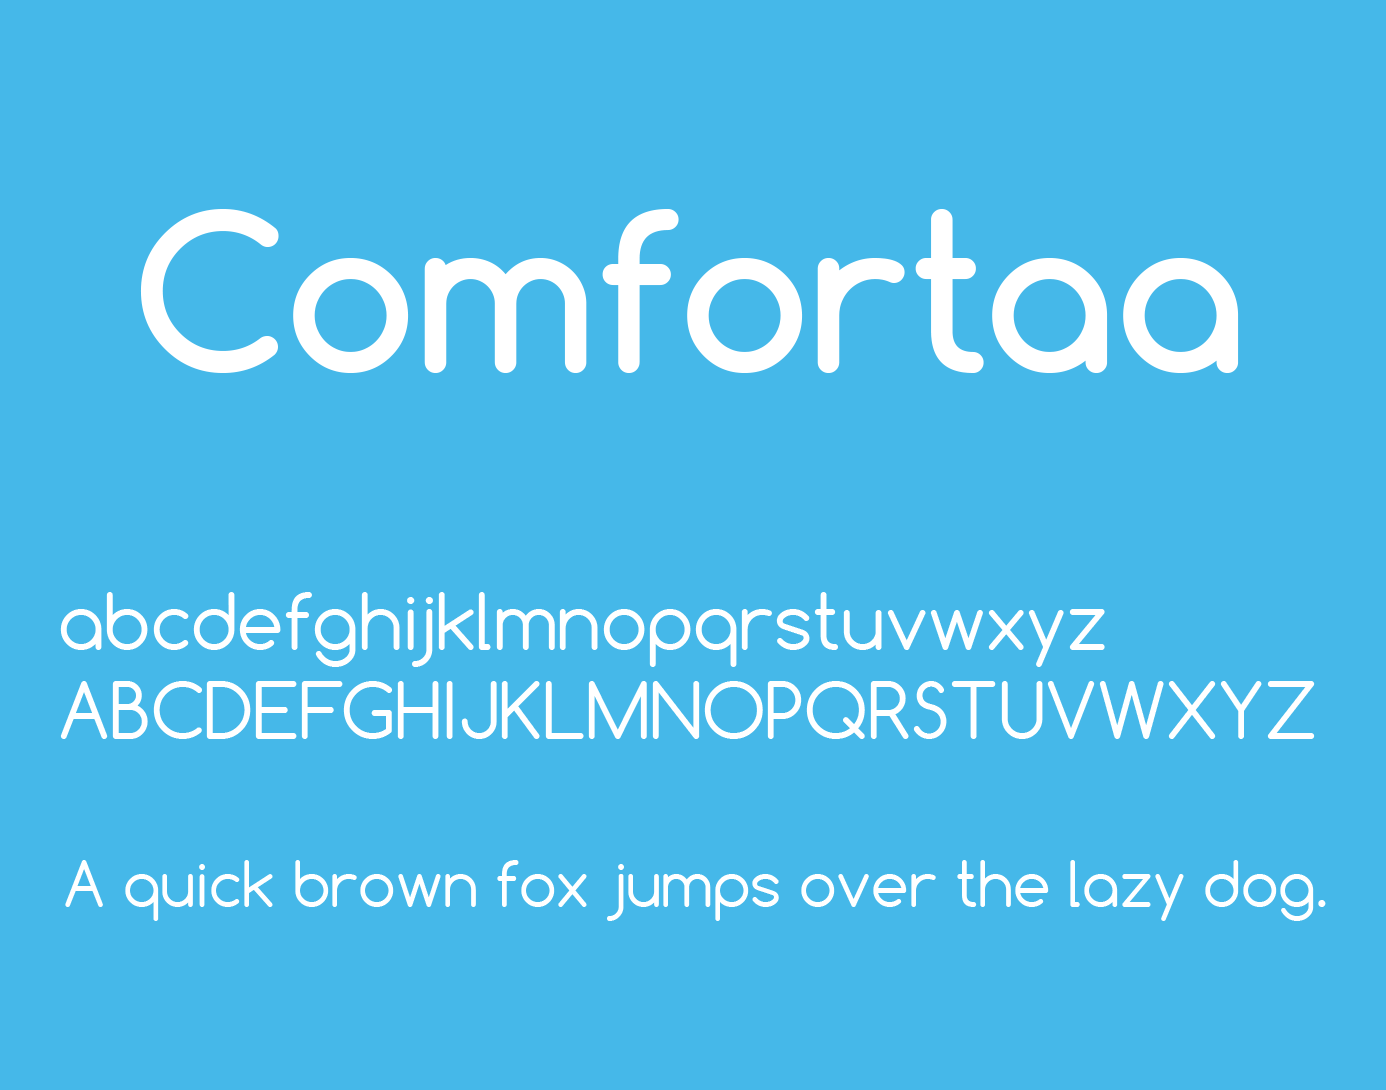 comfortaa font download for photoshop